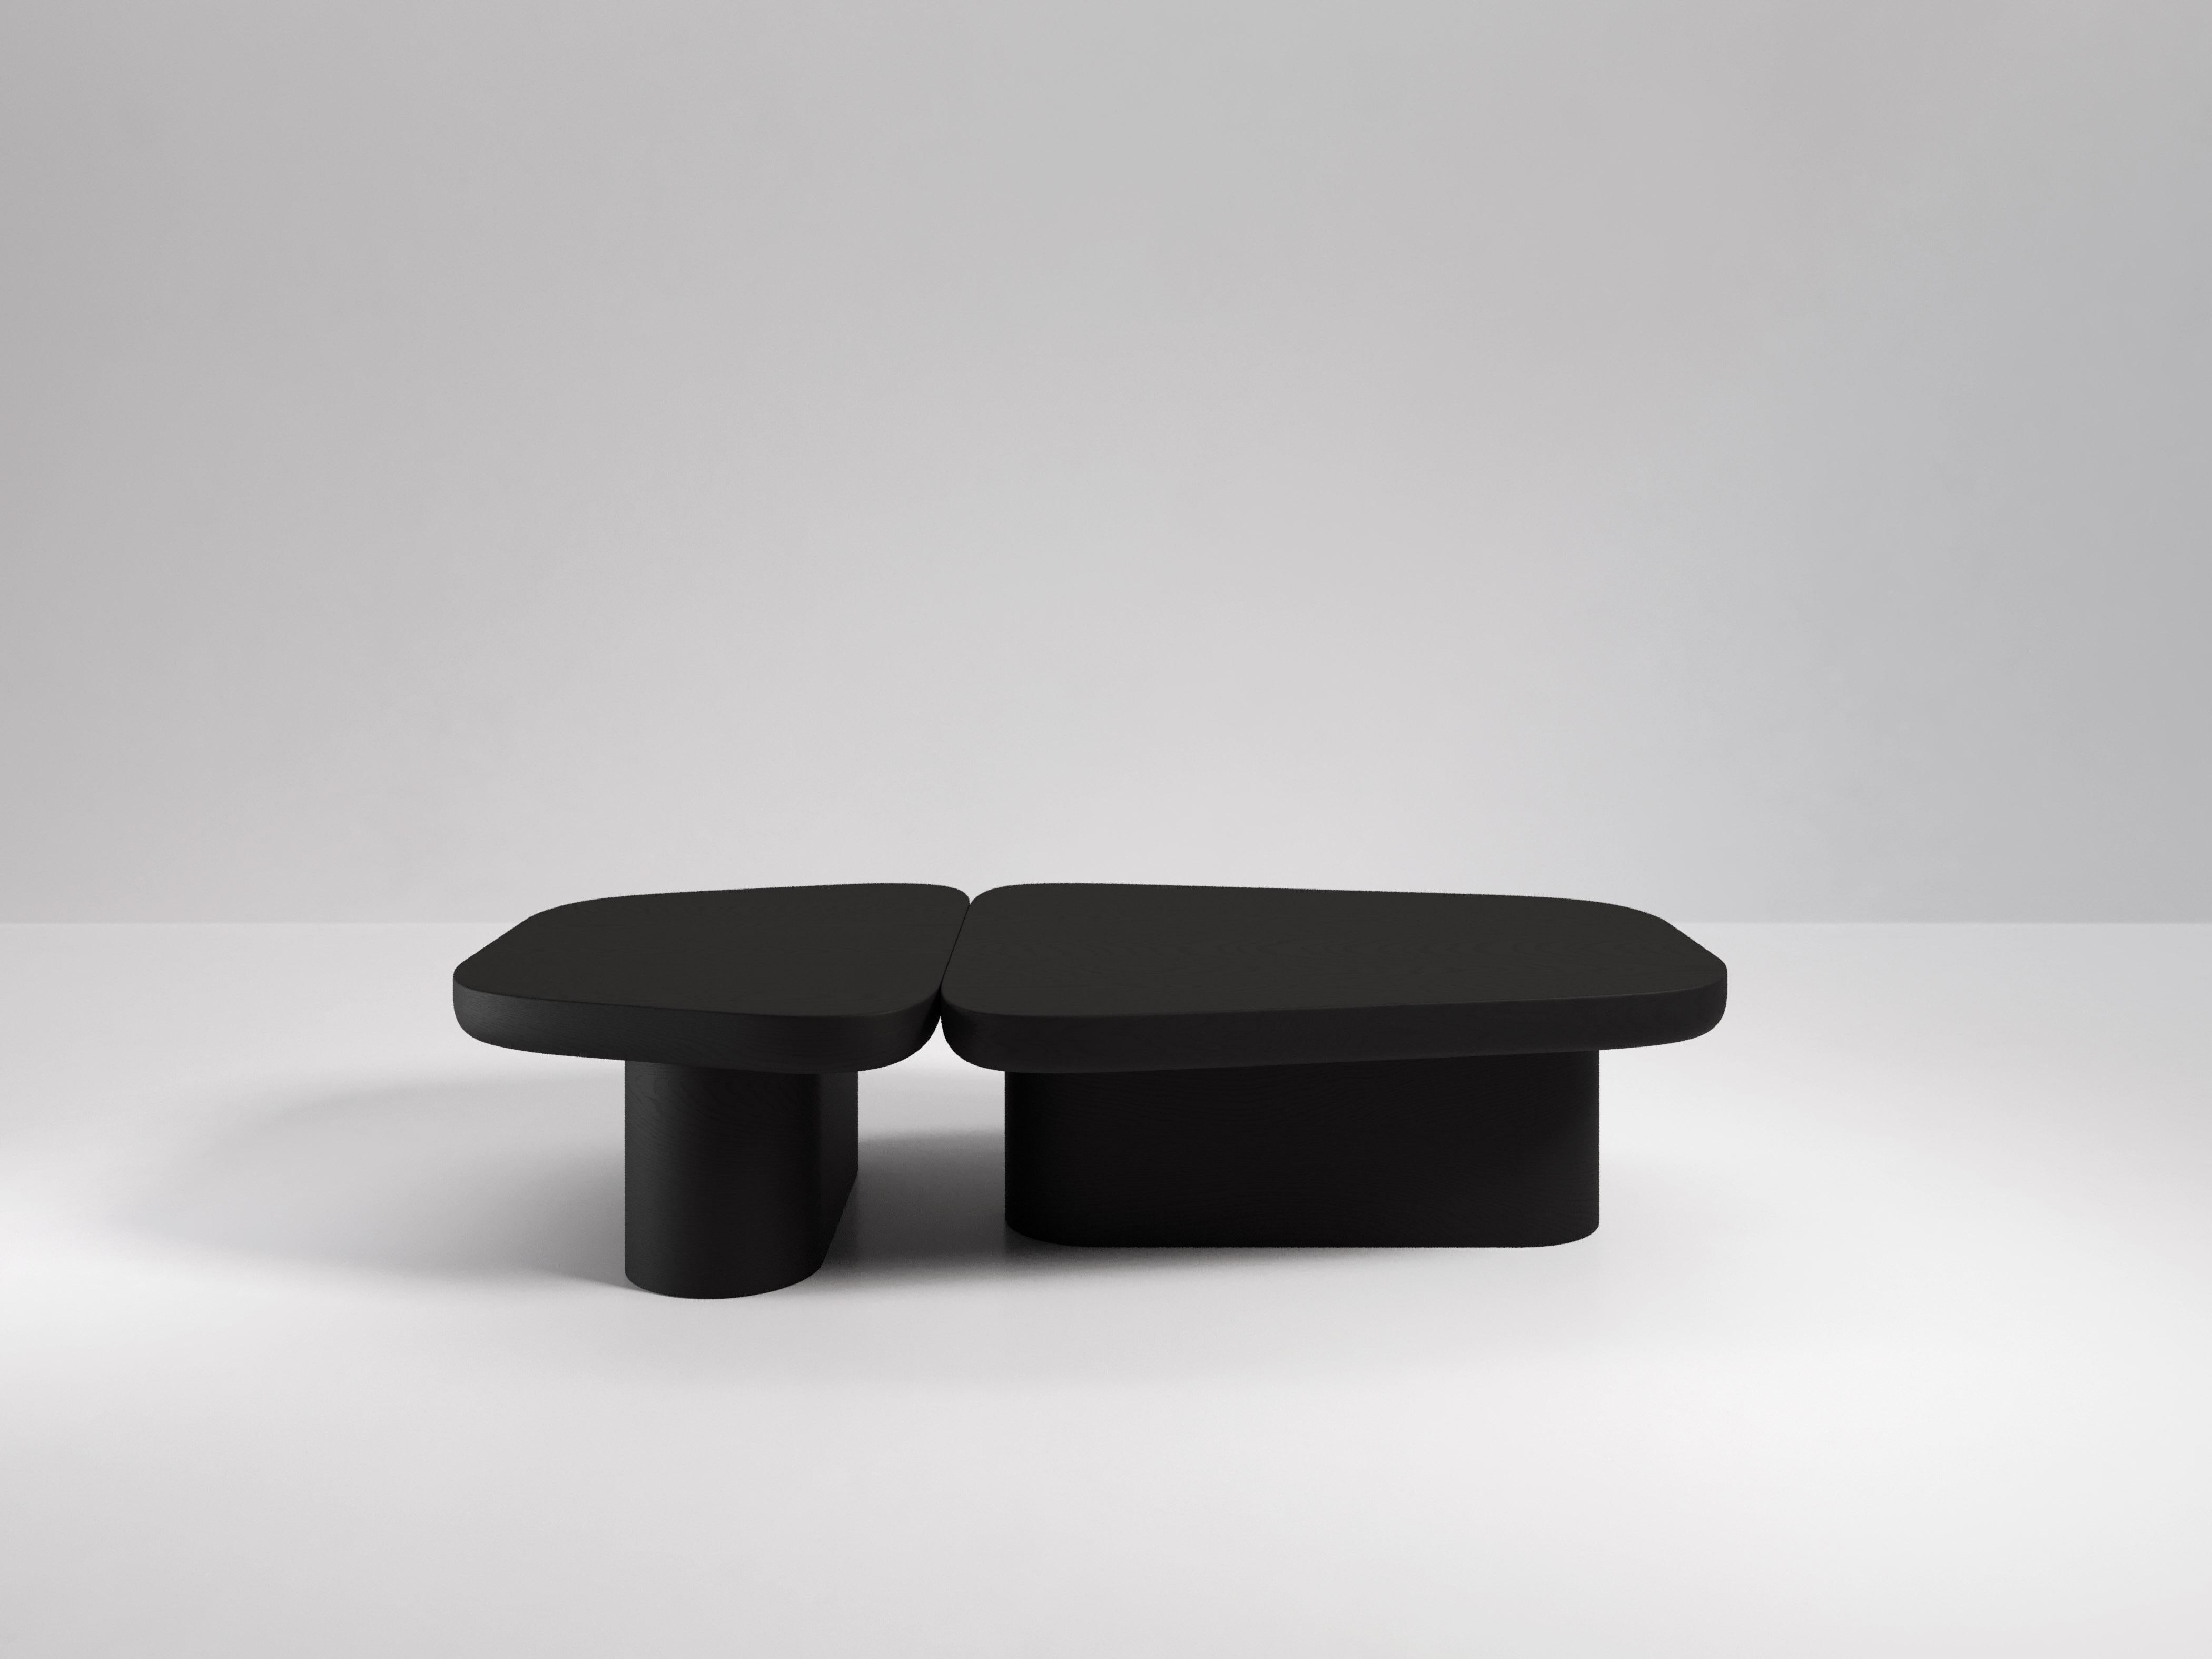 Two coffee tables with only one leg each make up the Pangea Coffee Table. It’s monolithic forms make it a fascinating and eye-catching addition to any room. The tables support each other in a way that would not be possible if they were apart, giving